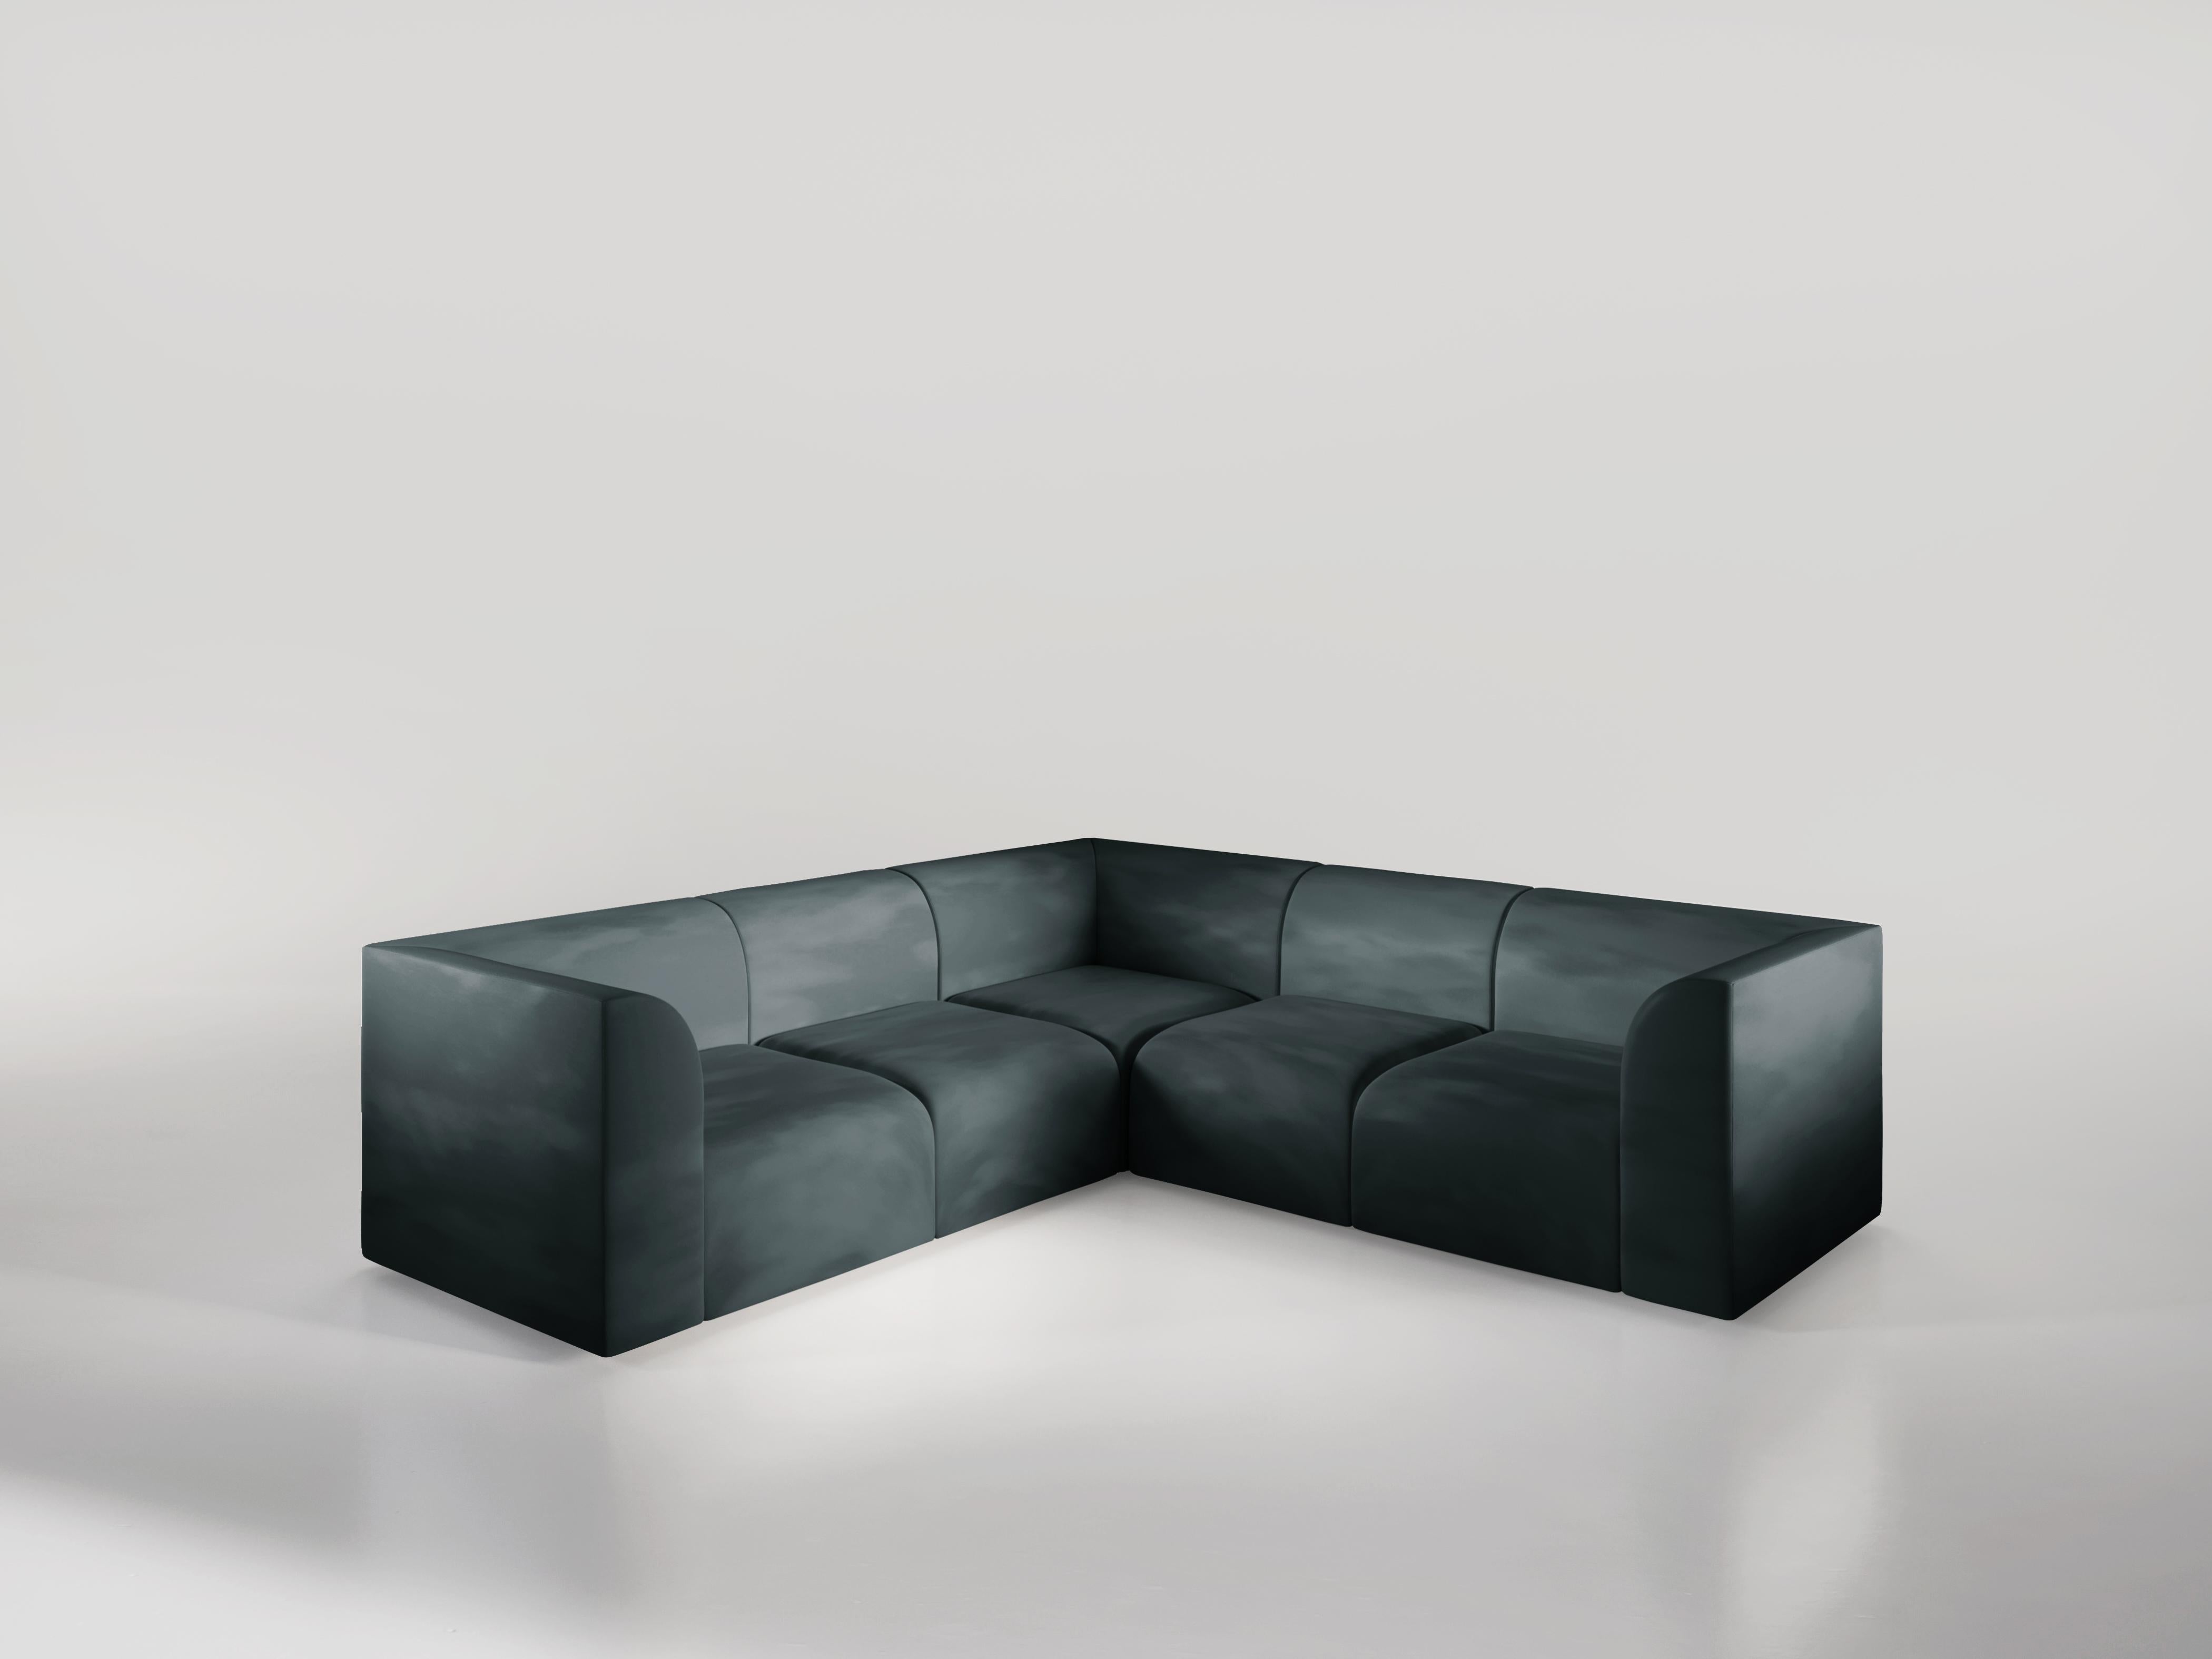 A modular sofa designed as a response to a staple of Romanesque Architecture. Designed to subtly explore the contrast between the inside and outside of a sofa, the outer sides are square and sharp, whereas the inside corners are smooth and curve